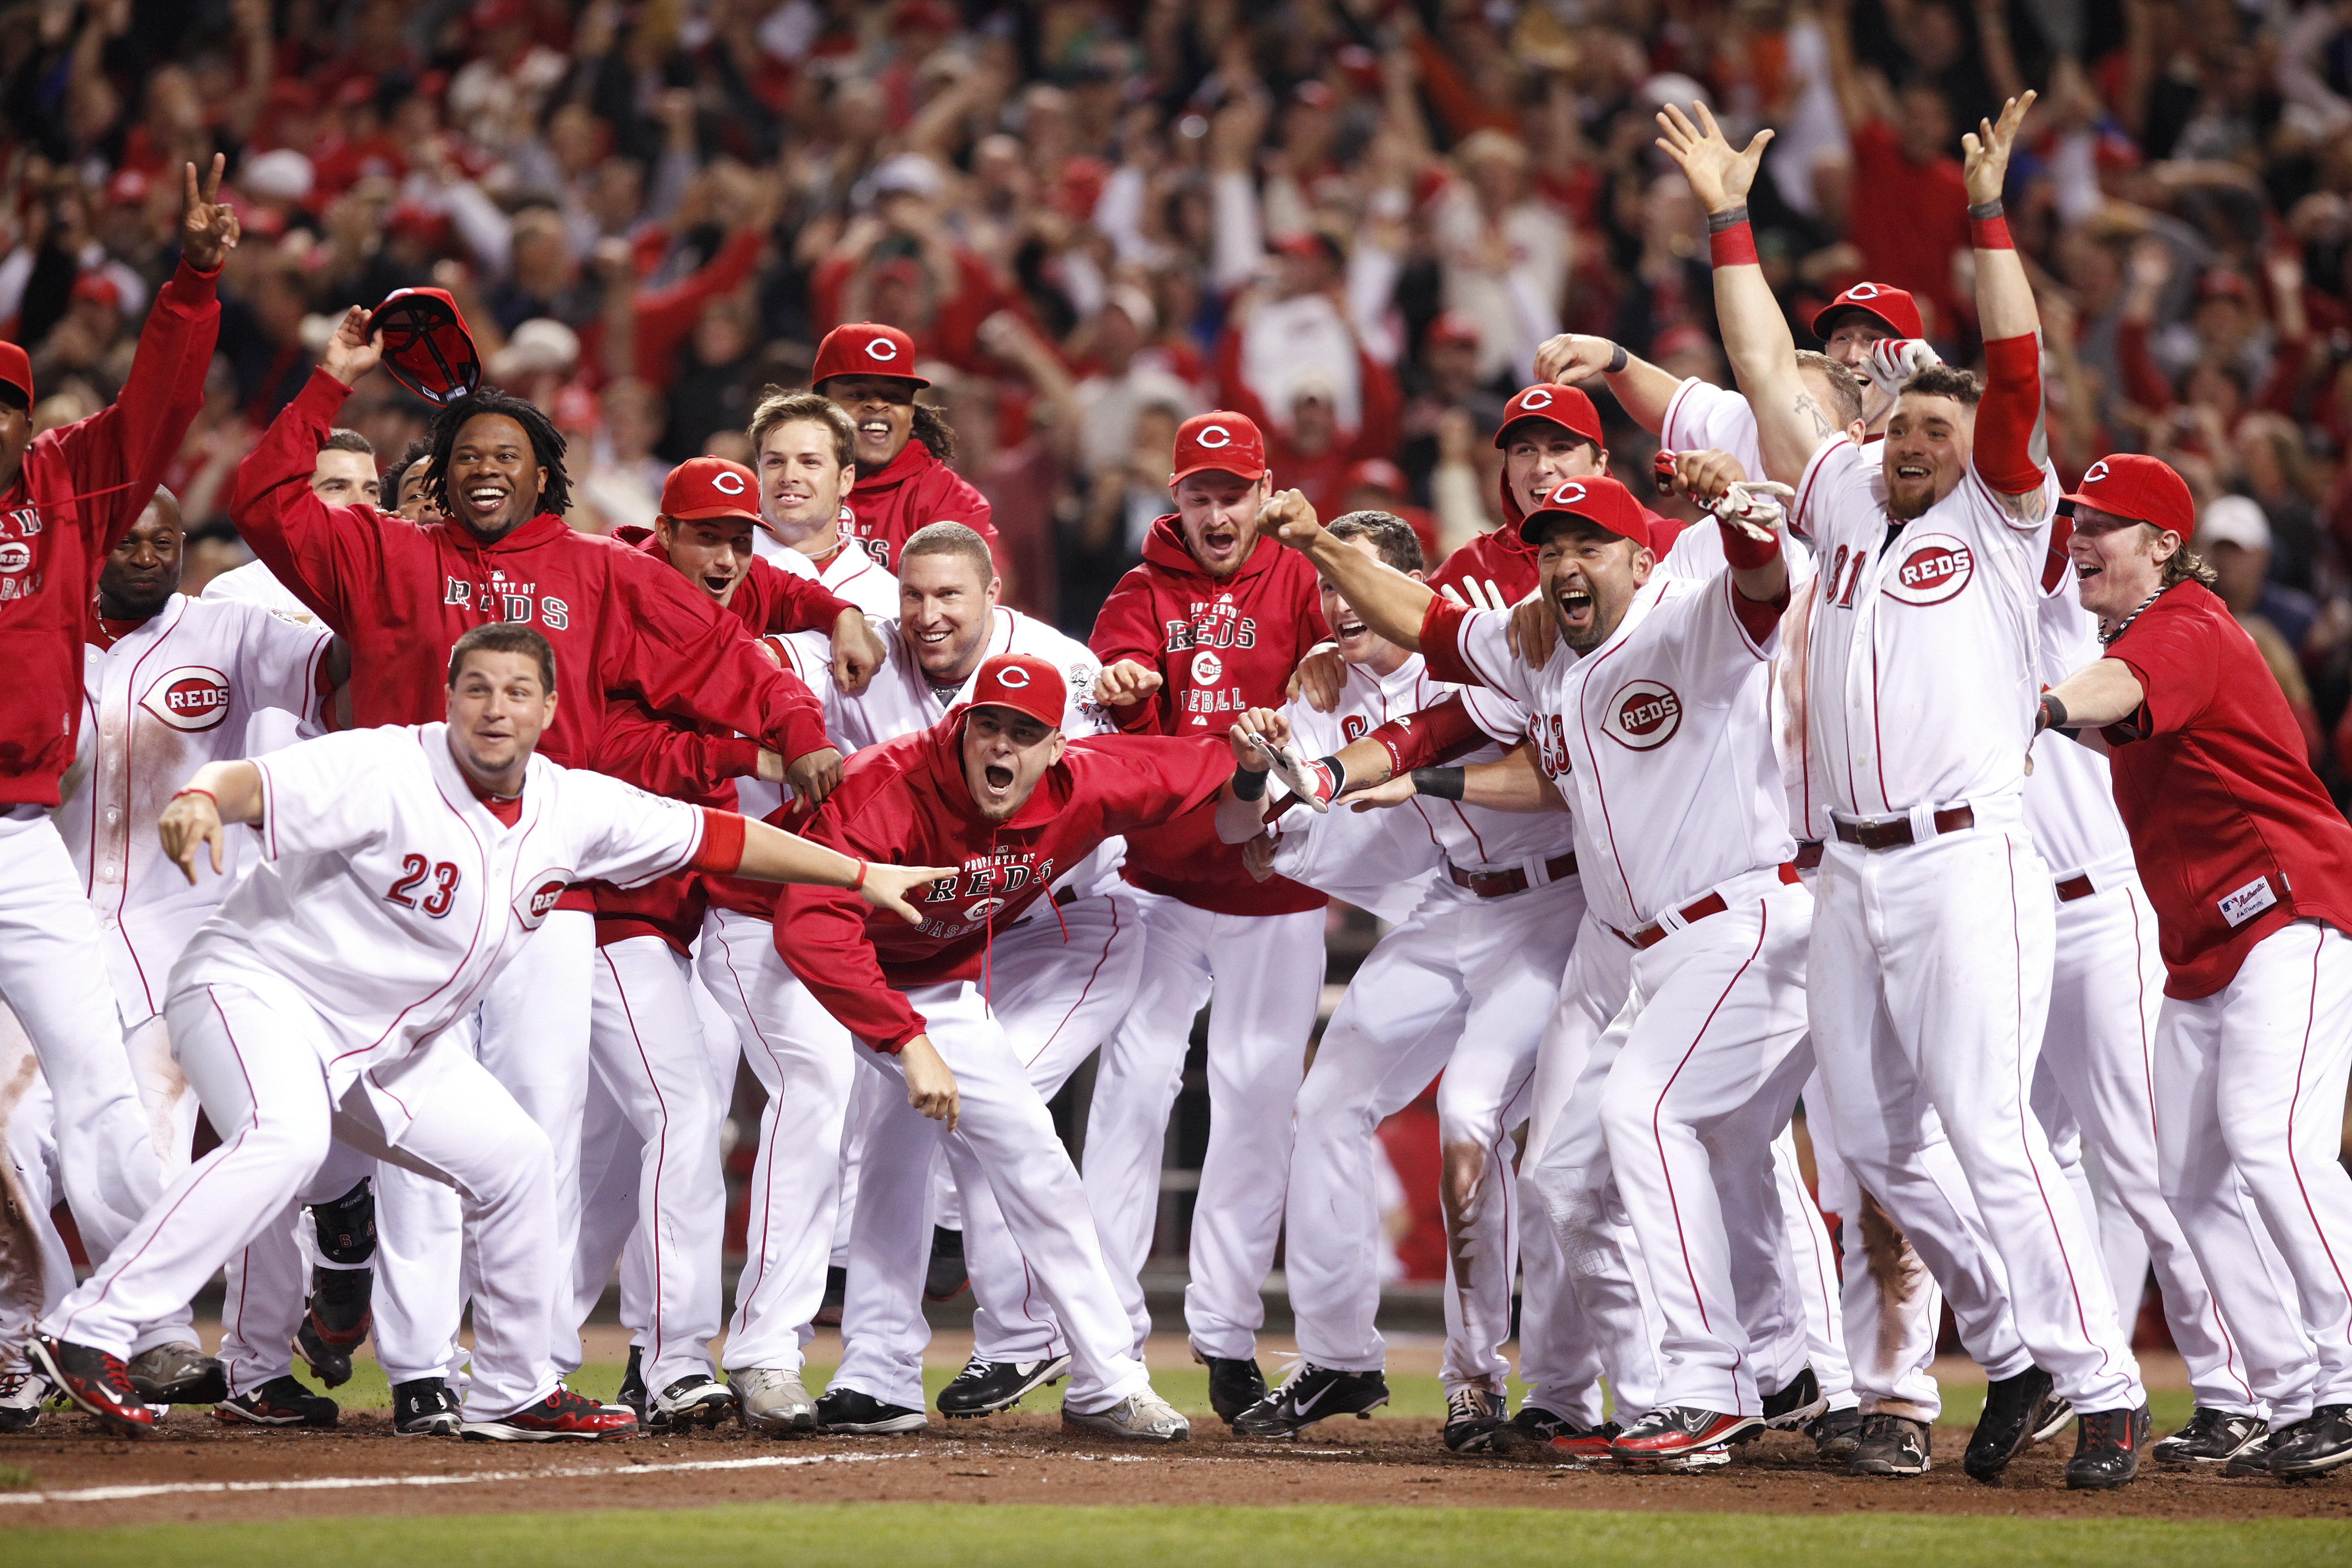 CINCINNATI, OH - SEPTEMBER 28: The Cincinnati Reds celebrate Jay Bruce's walk off home run against the Houston Astros at Great American Ball Park on September 28, 2010 in Cincinnati, Ohio. The Reds won 3-2 to clinch the NL Central Division title. (Photo b